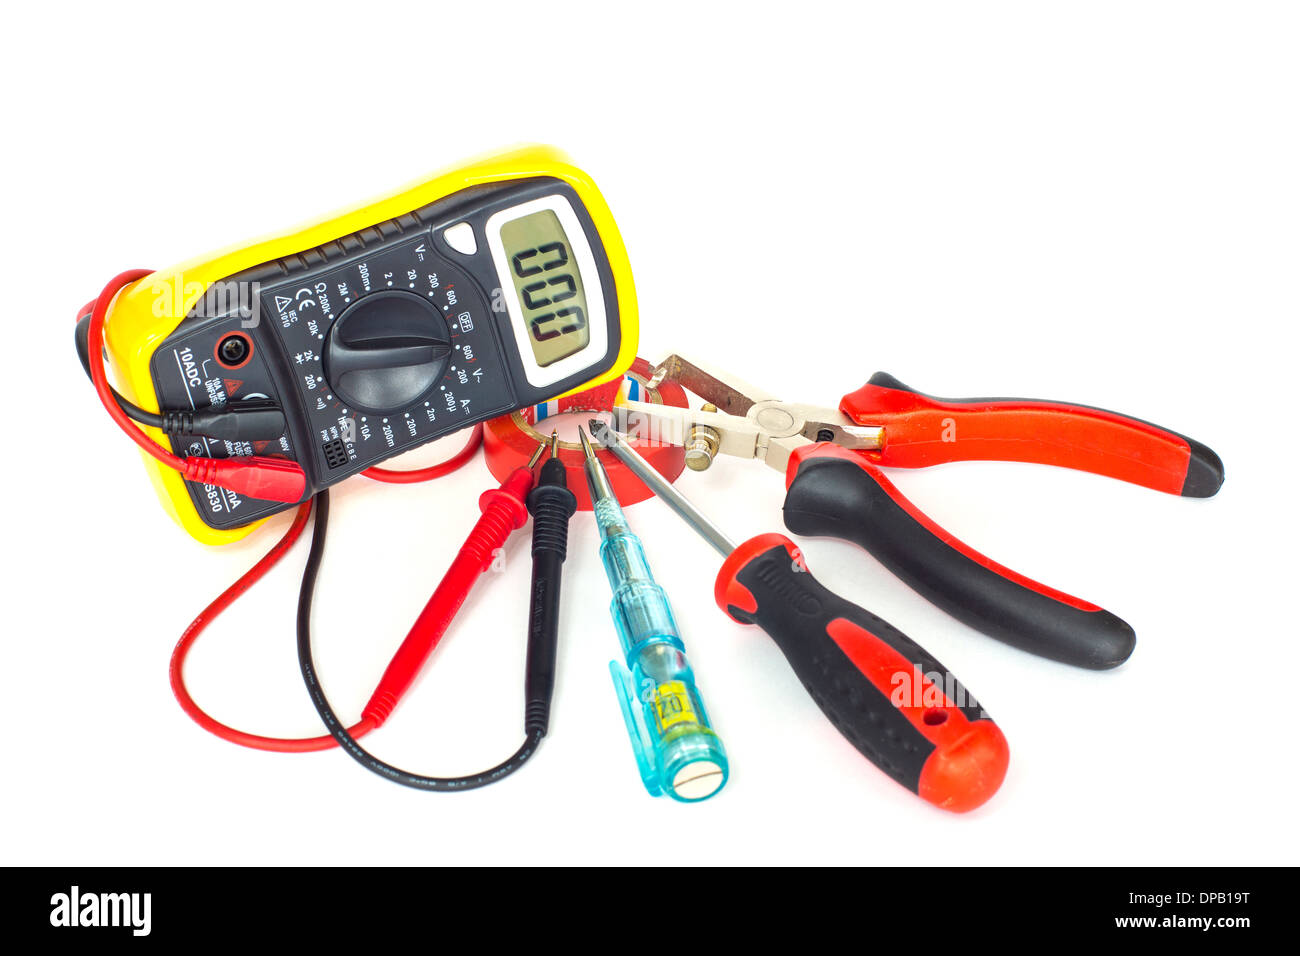 Electrician tools Stock Photo